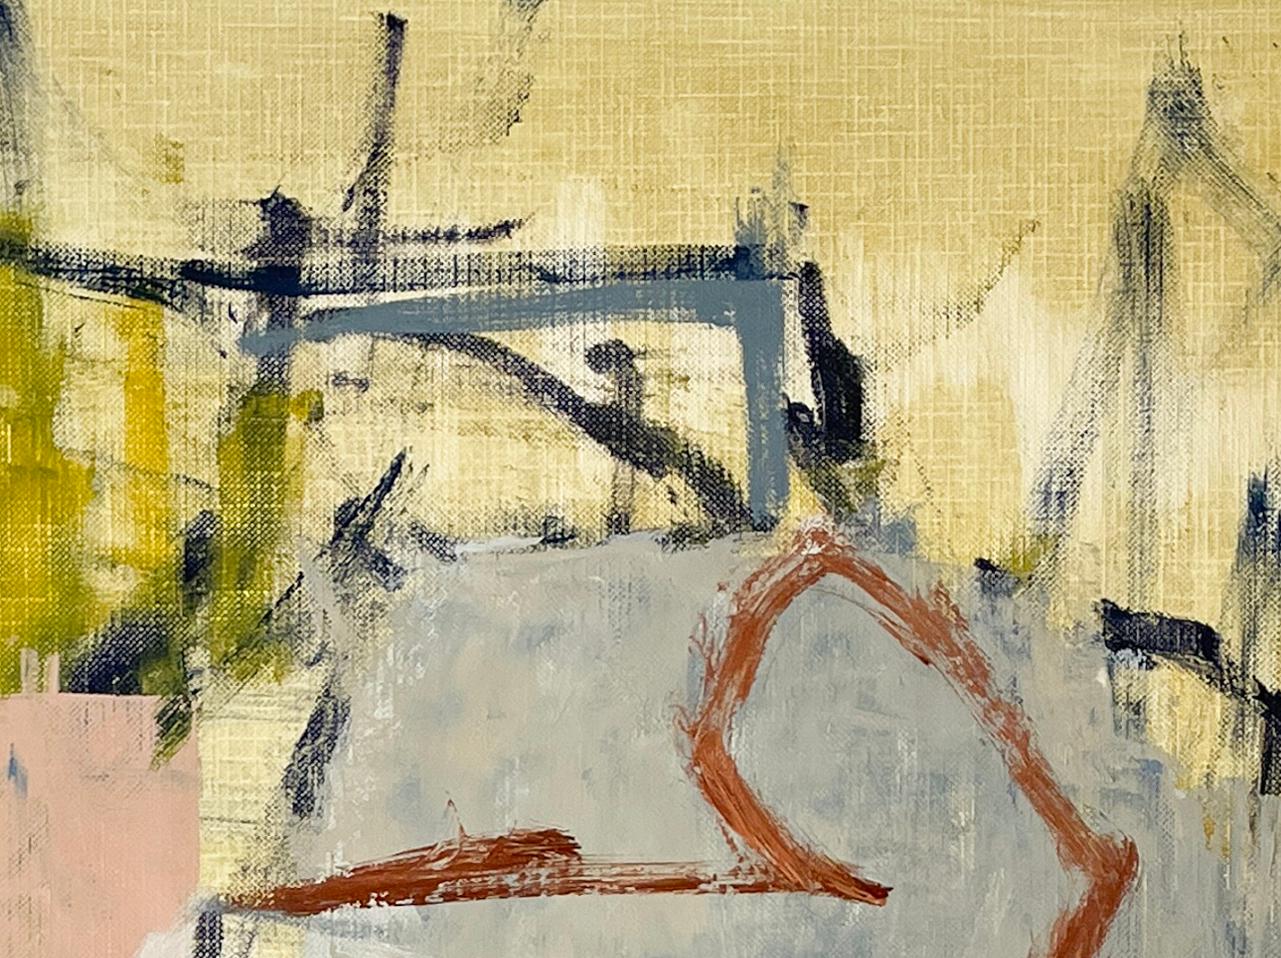 Workstation 16 (Gestural Abstract Expressionist Painting on Canvas Paper) - Contemporary Art by Jenny Nelson